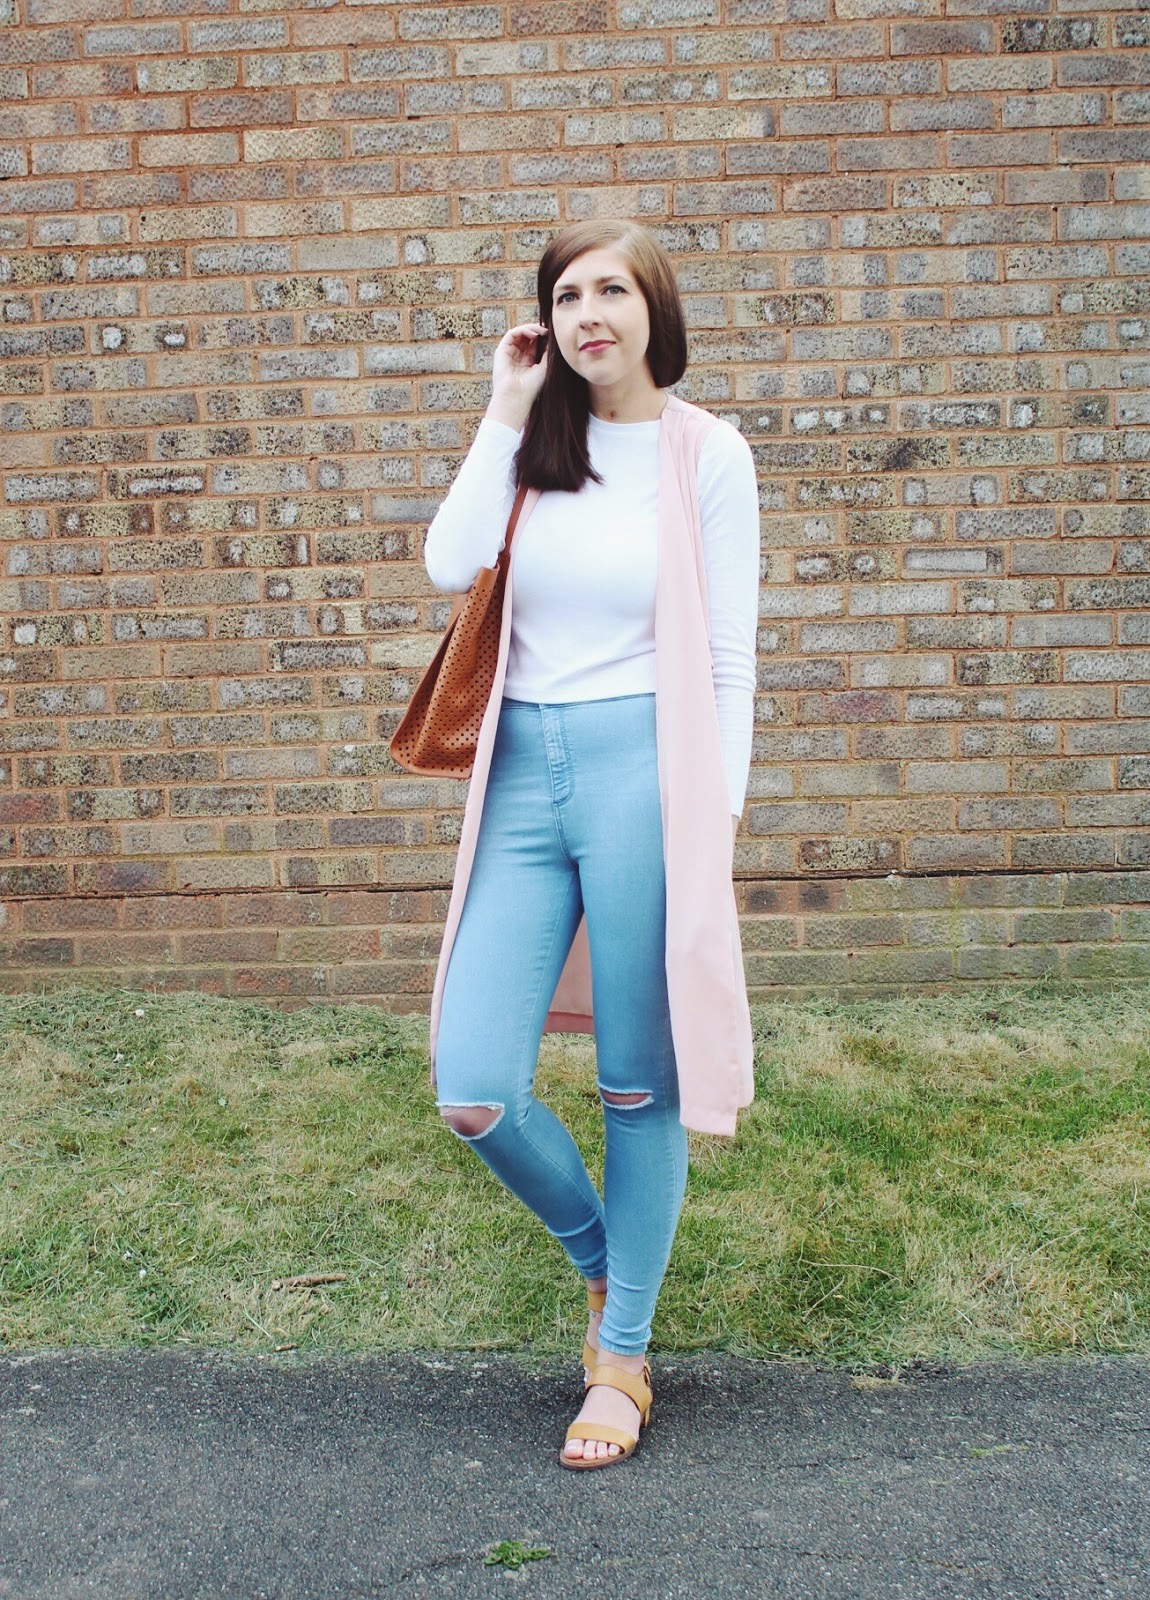 asseenonme, fbloggers, fblogger, halcyonvelvet, wiw, whatimwearing, lotd, lookoftheday, ootd, outfitoftheday, primark, summerlook, croptop, rippedskinnyjeans, pinktailoring, fashion, fashionbloggers, fashionblogger